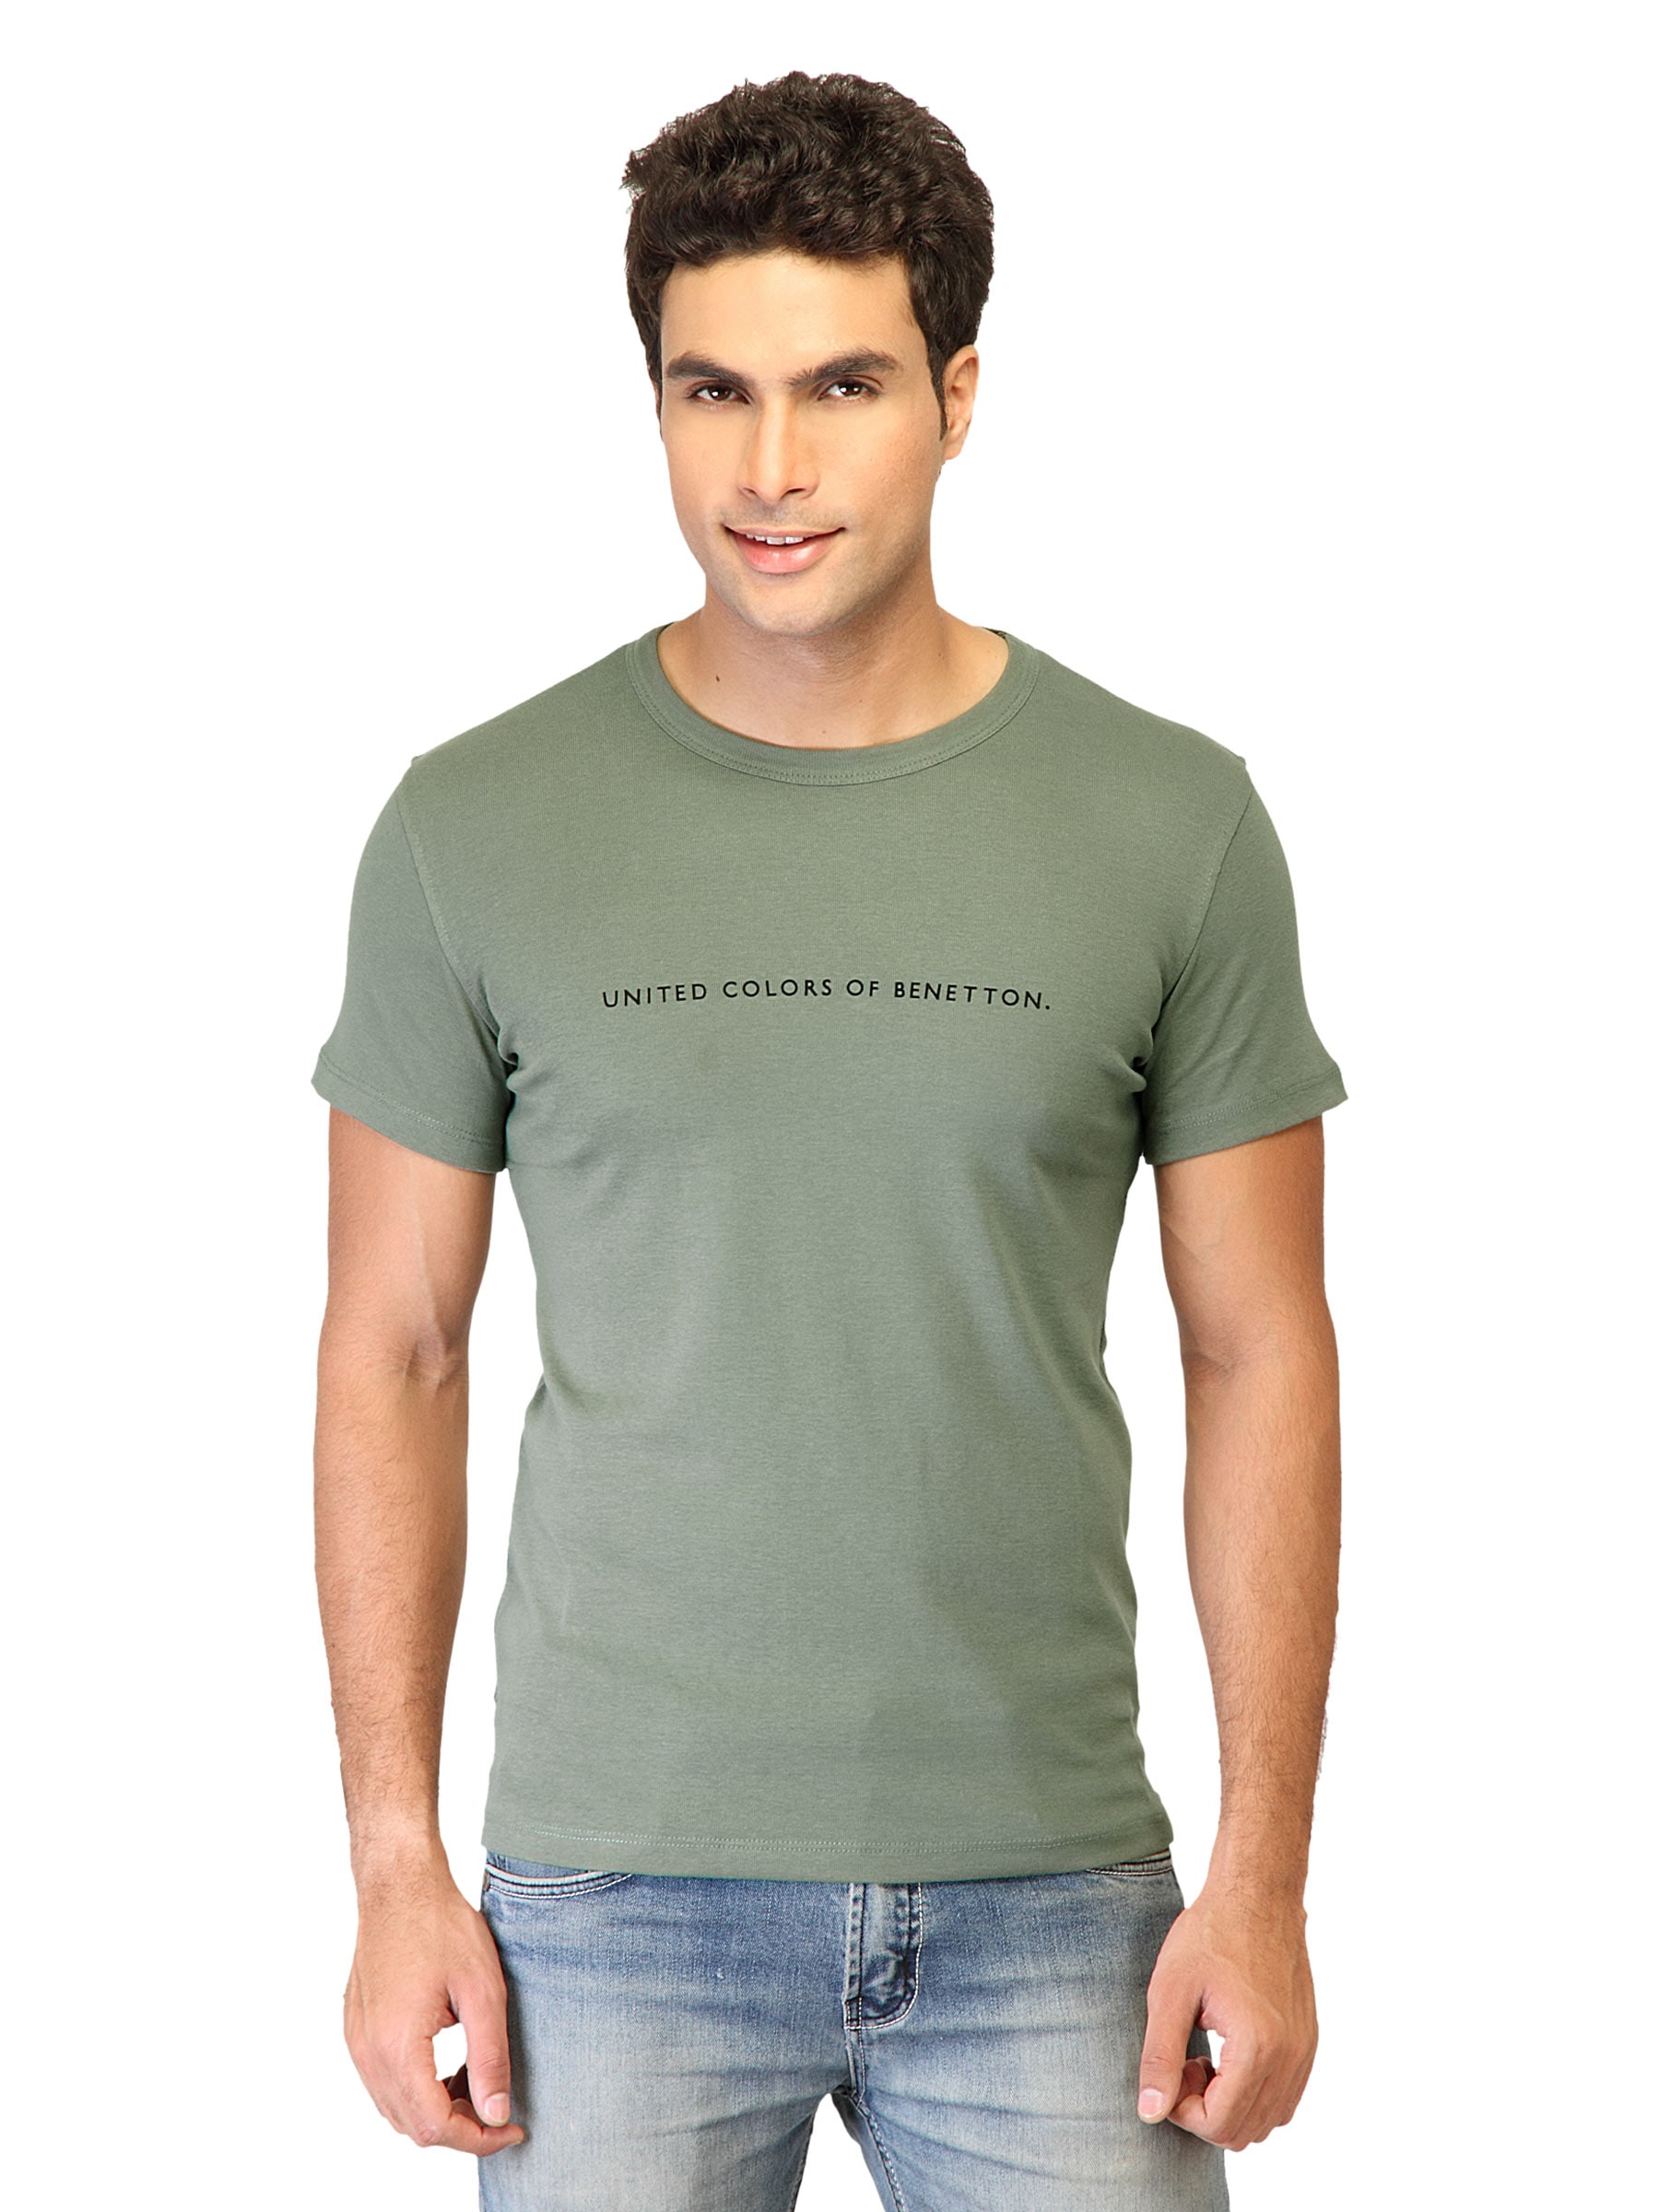 United Colors of Benetton Men Solid Green Tshirts